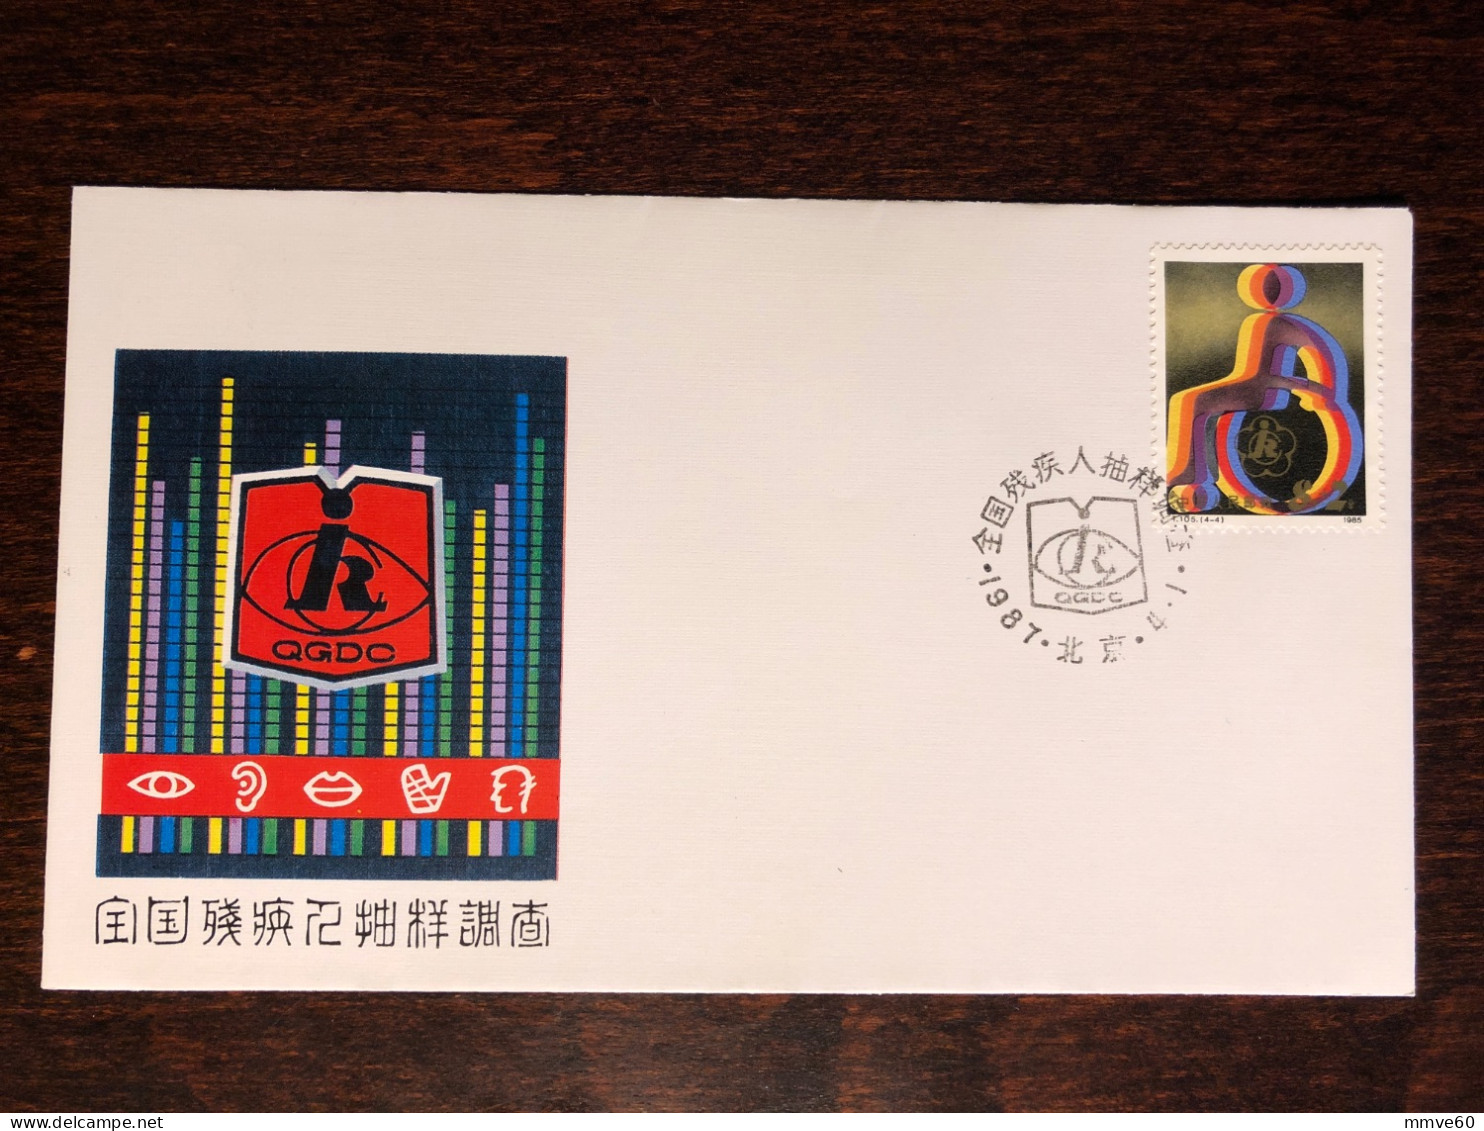 CHINA PRC SPECIAL COVER AND CANCELLATION 1989 YEAR DISABLED PEOPLE HEALTH MEDICINE STAMPS - 1980-1989